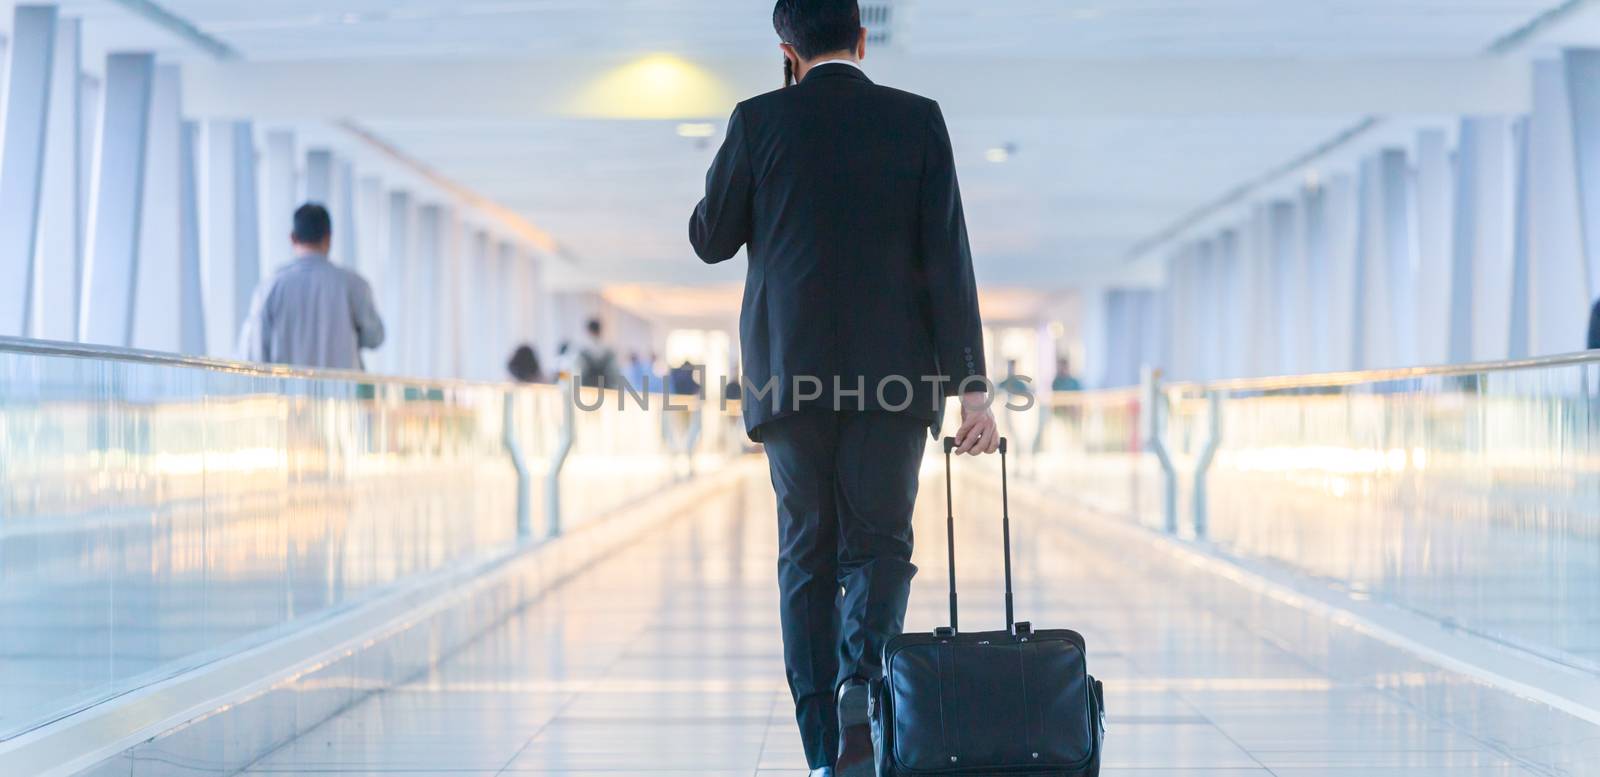 Rear view of unrecognizable formaly dressed businessman walking and wheeling a trolley suitcase at the lobby, talking on a mobile phone. Business travel concept.